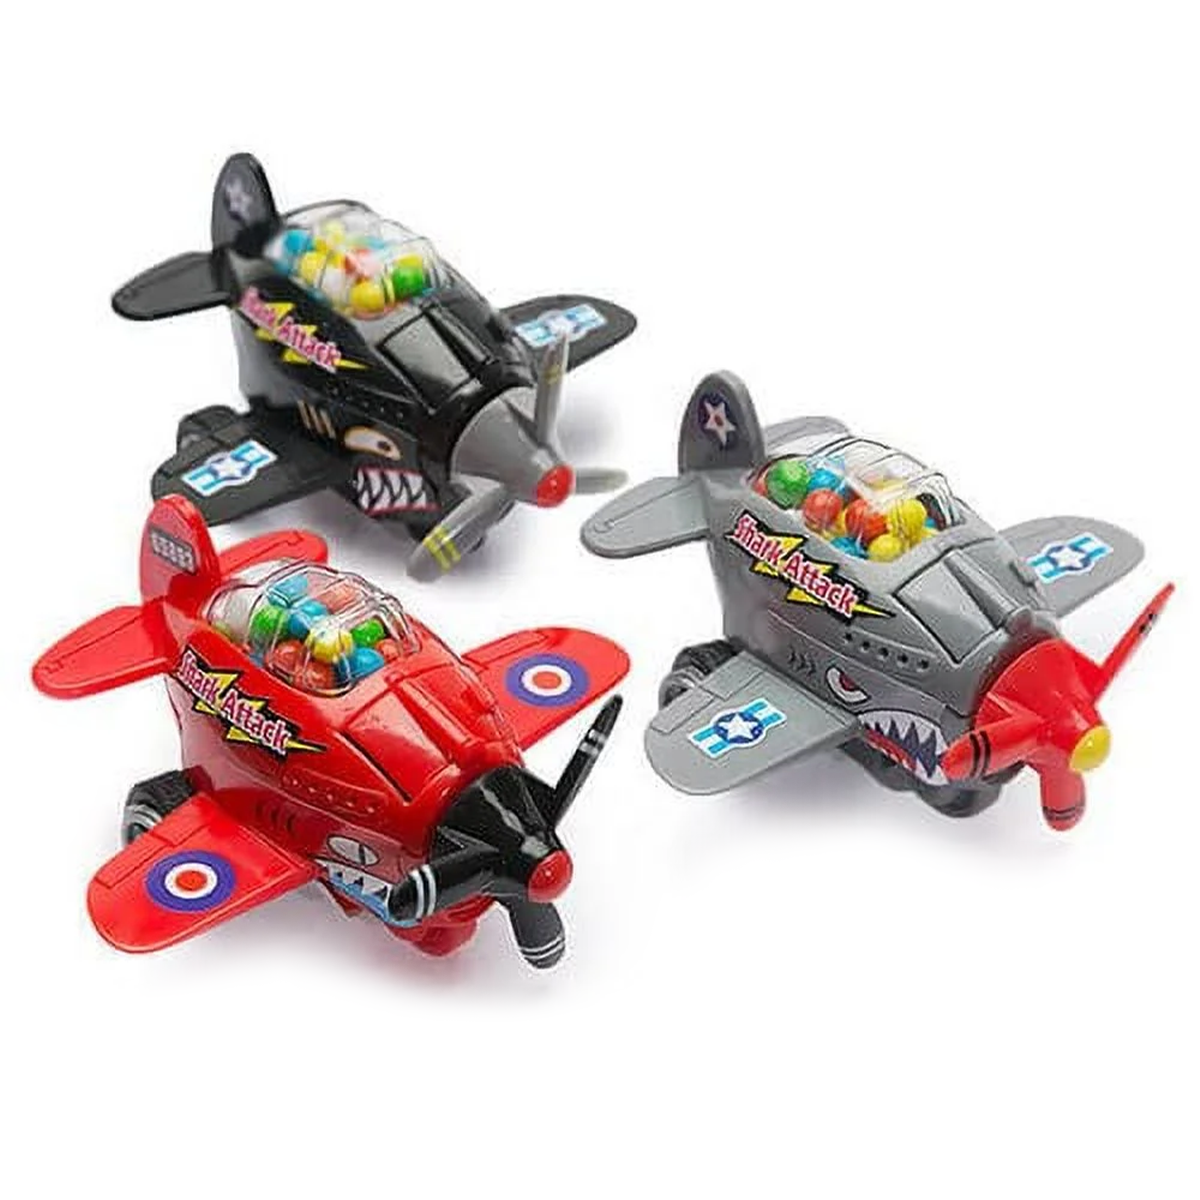 Shark Attack Candy Filled Toy Plane